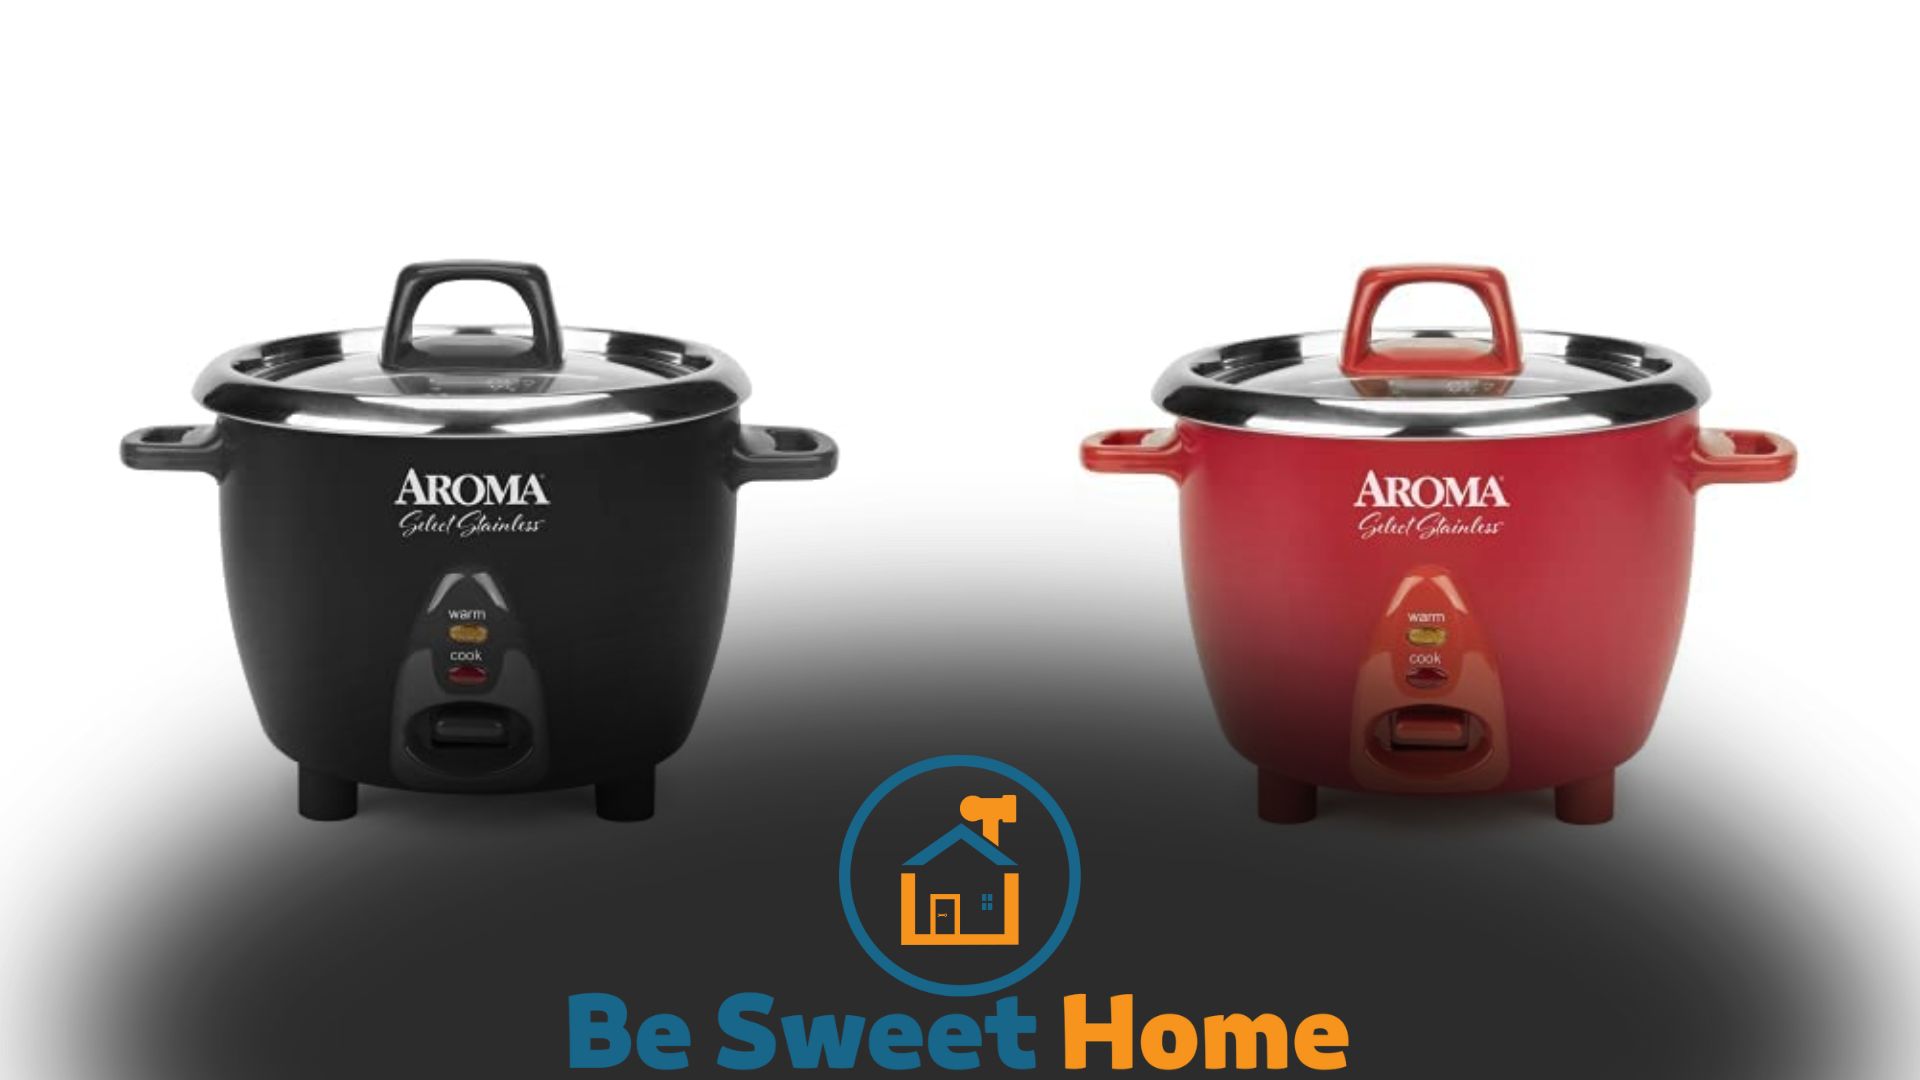 Key Features Of The Aroma Arc-753sg Rice Cooker